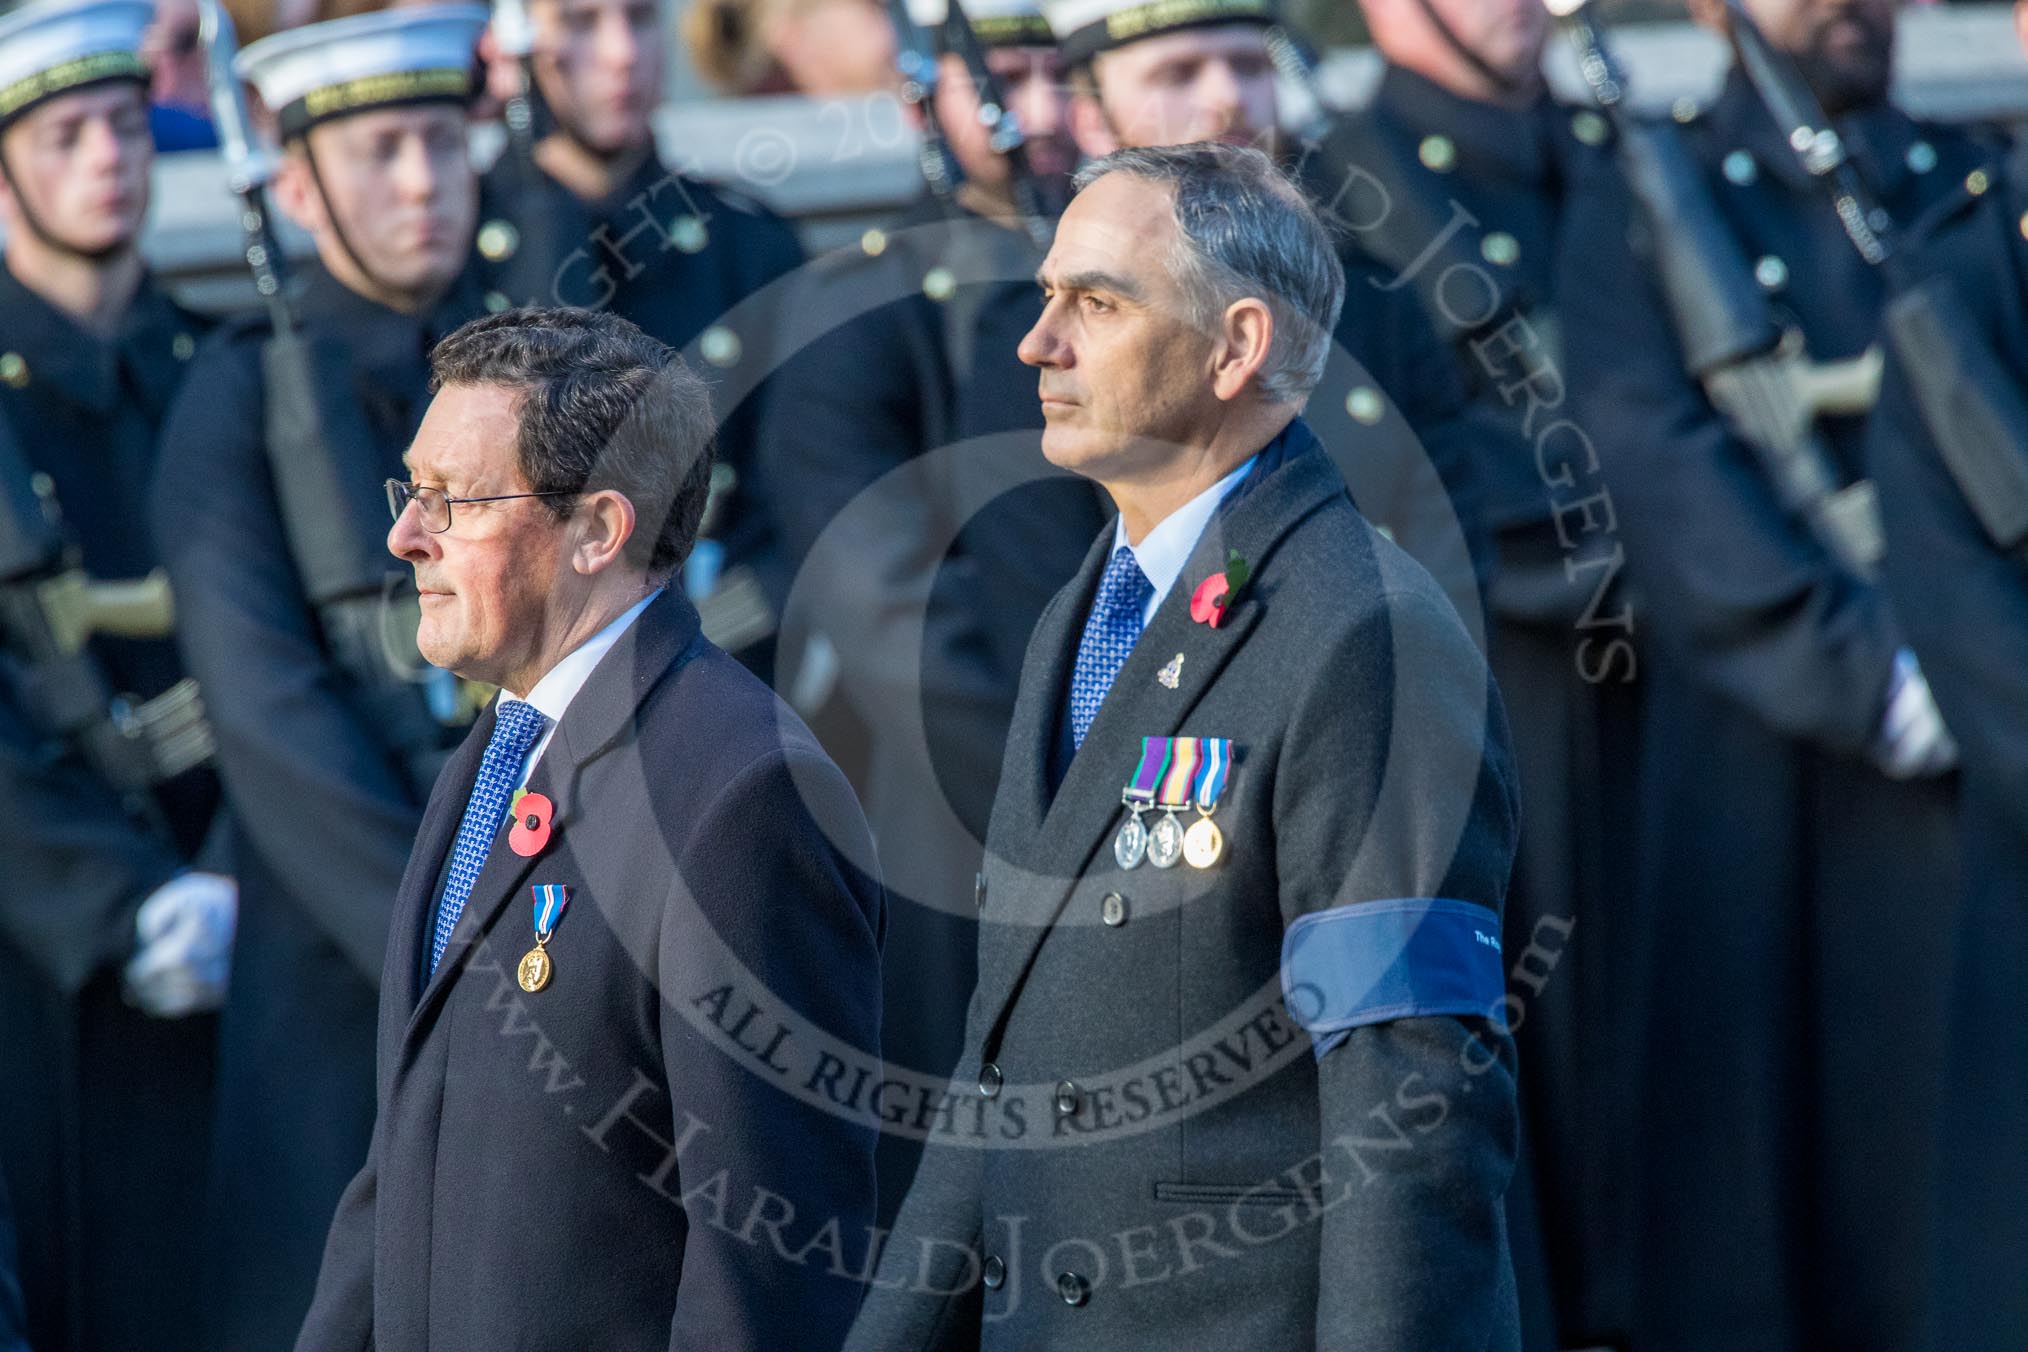 Royal Naval Medical Branch Ratings and Sick Berth Staff Association   (Group E35, 24 members) during the Royal British Legion March Past on Remembrance Sunday at the Cenotaph, Whitehall, Westminster, London, 11 November 2018, 11:45.